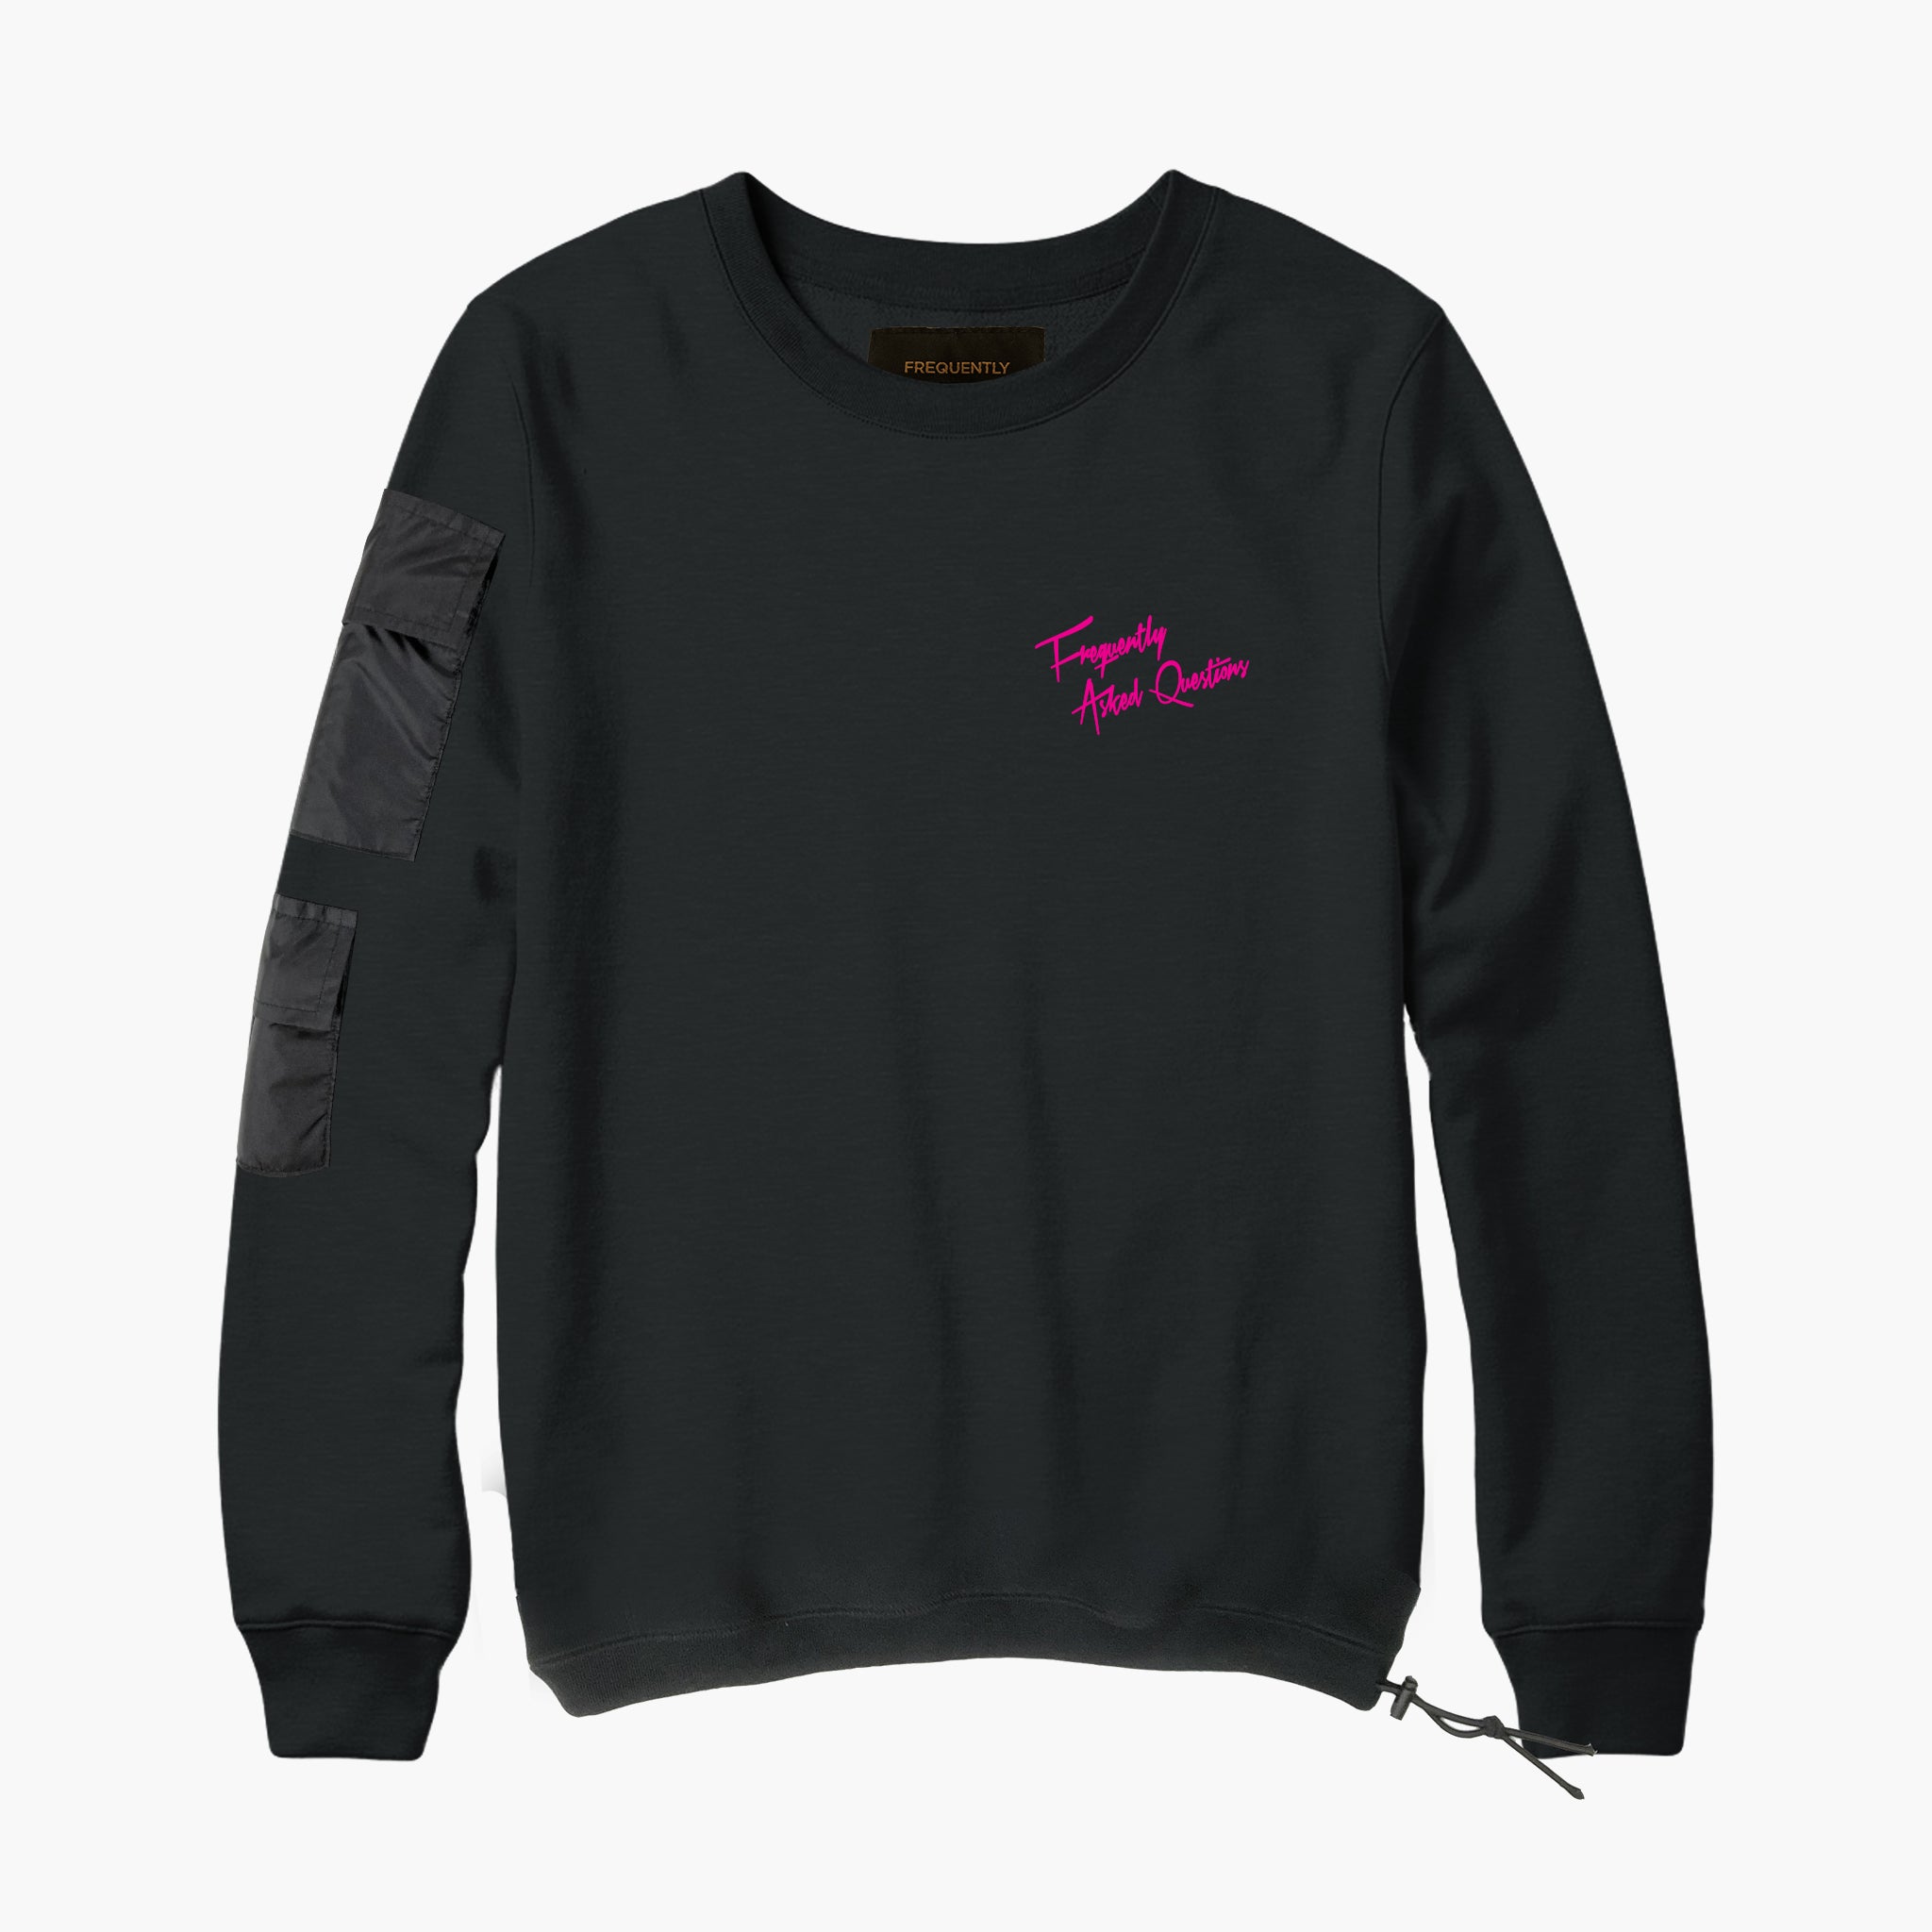 FAQ Pocket Sweatshirt - Frequently Asked Questions